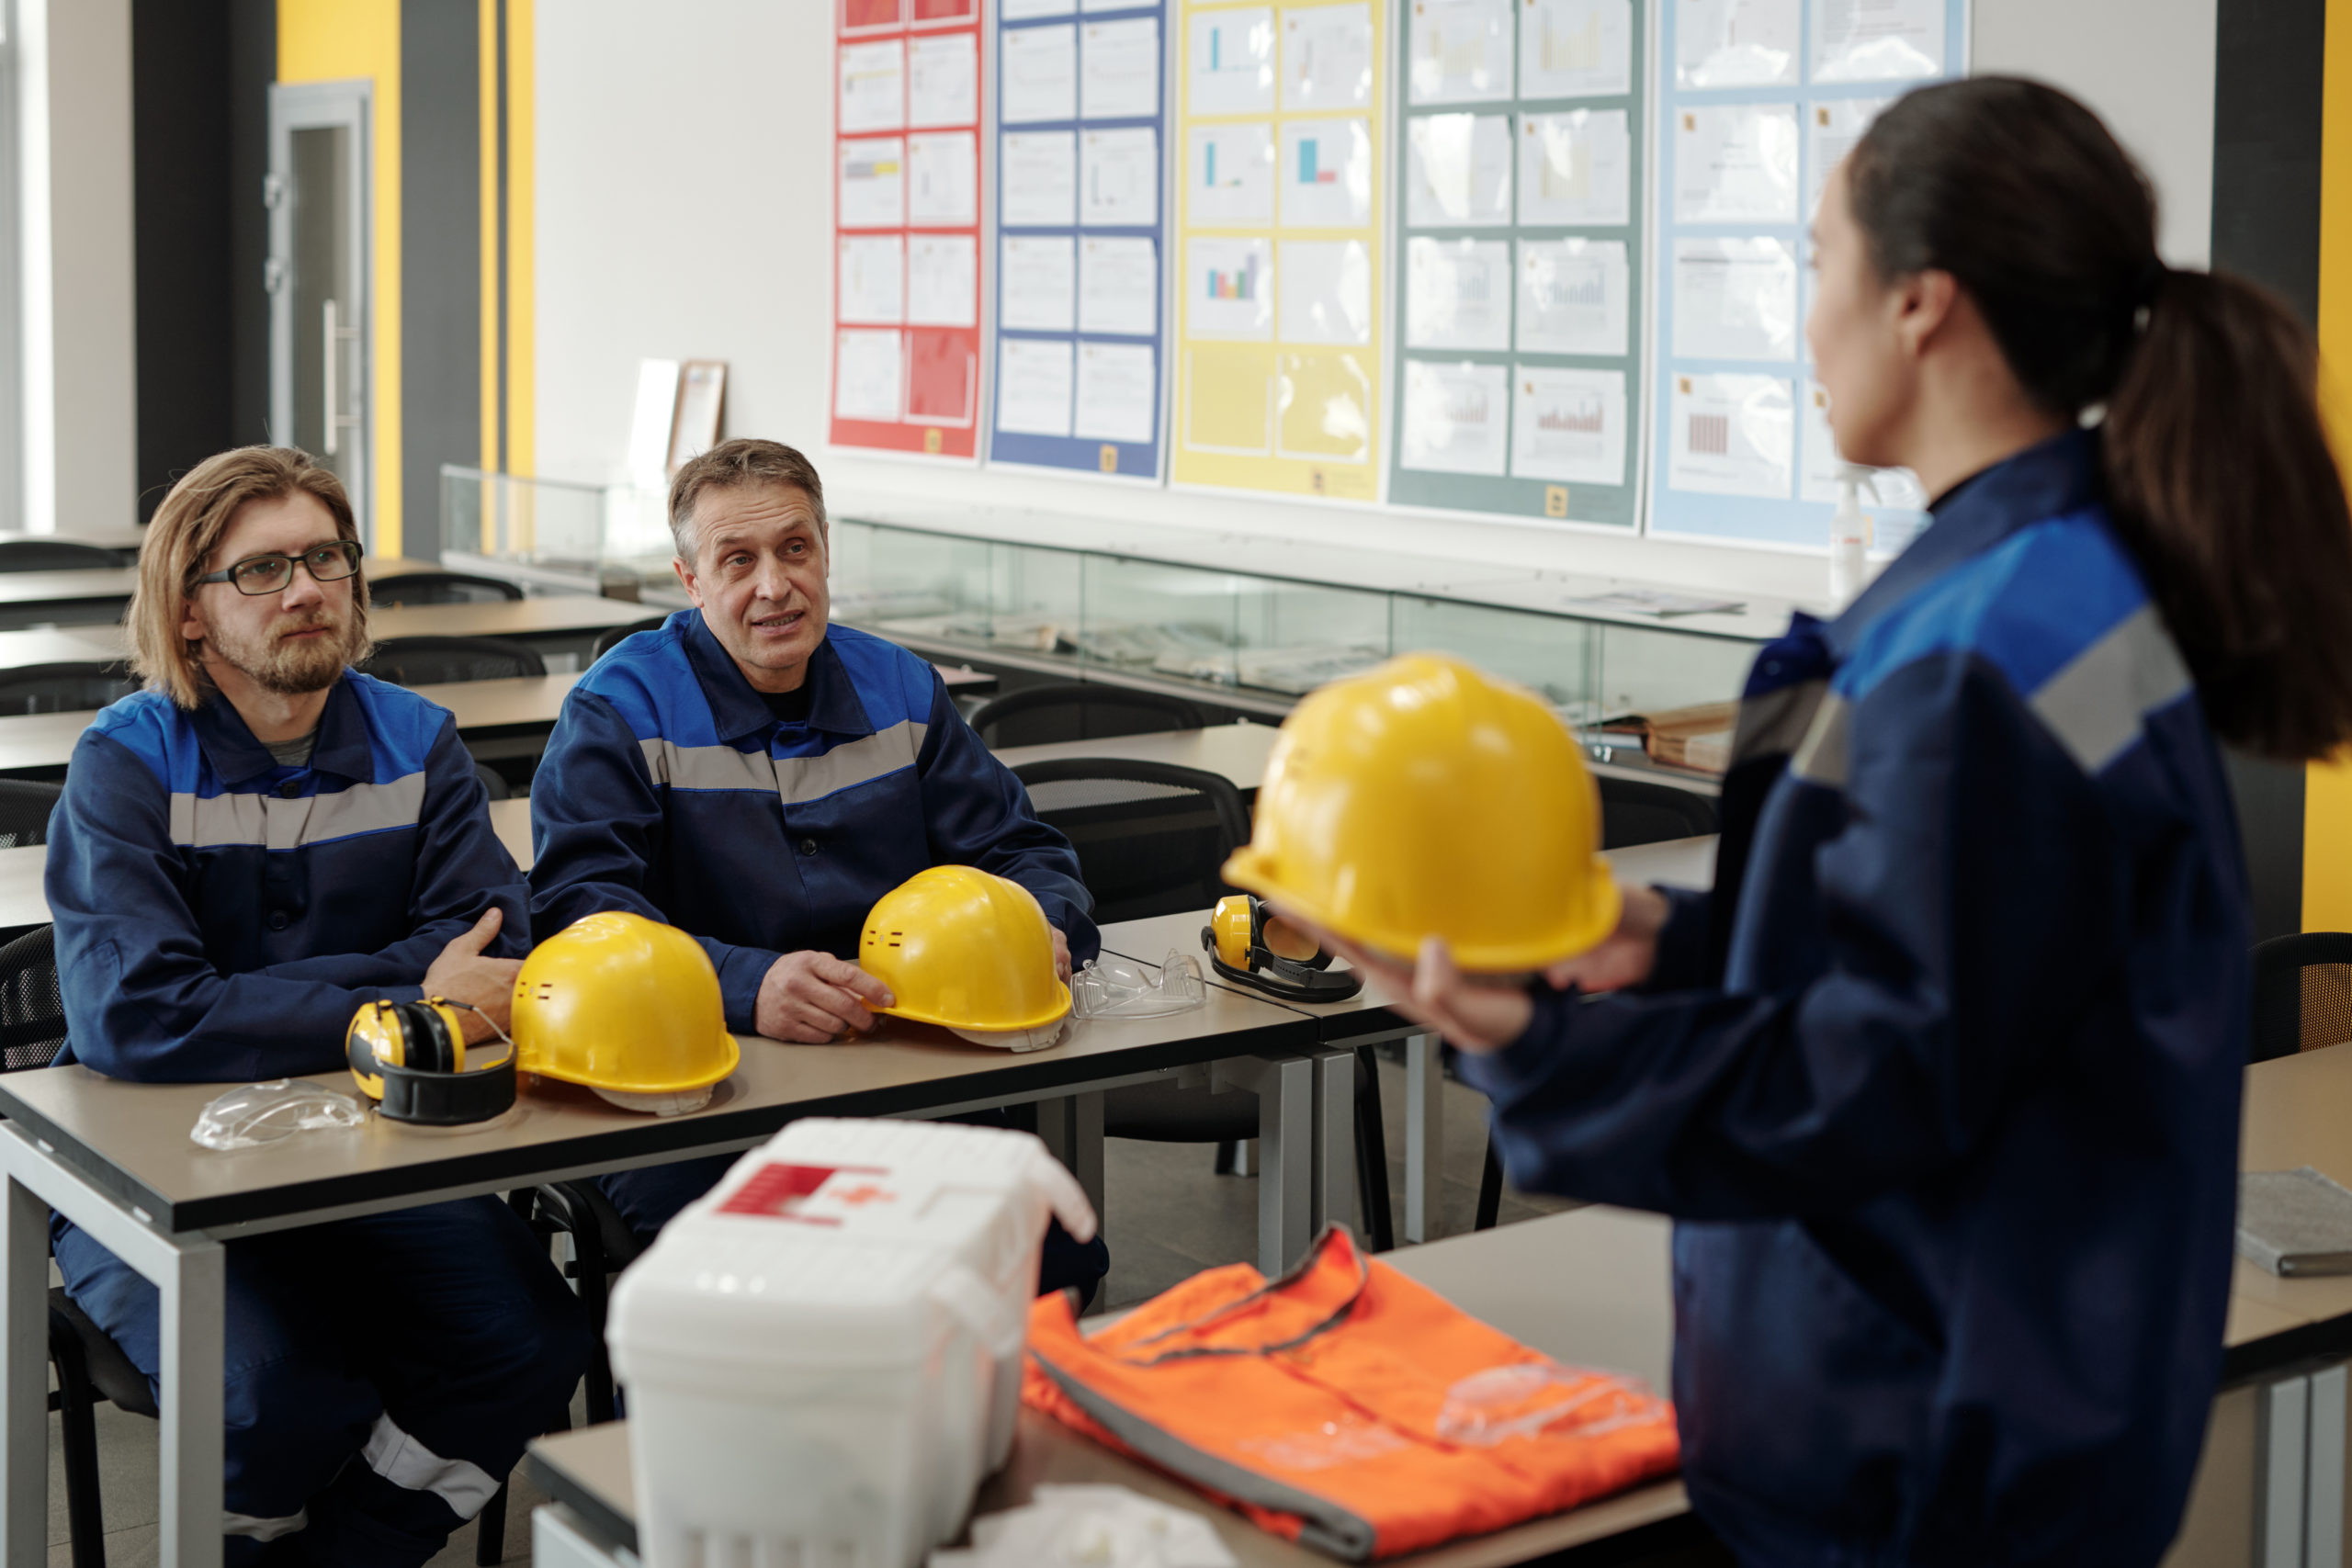 Female instructor holding hardhat and explaining occupational safety rules to workers sitting at table